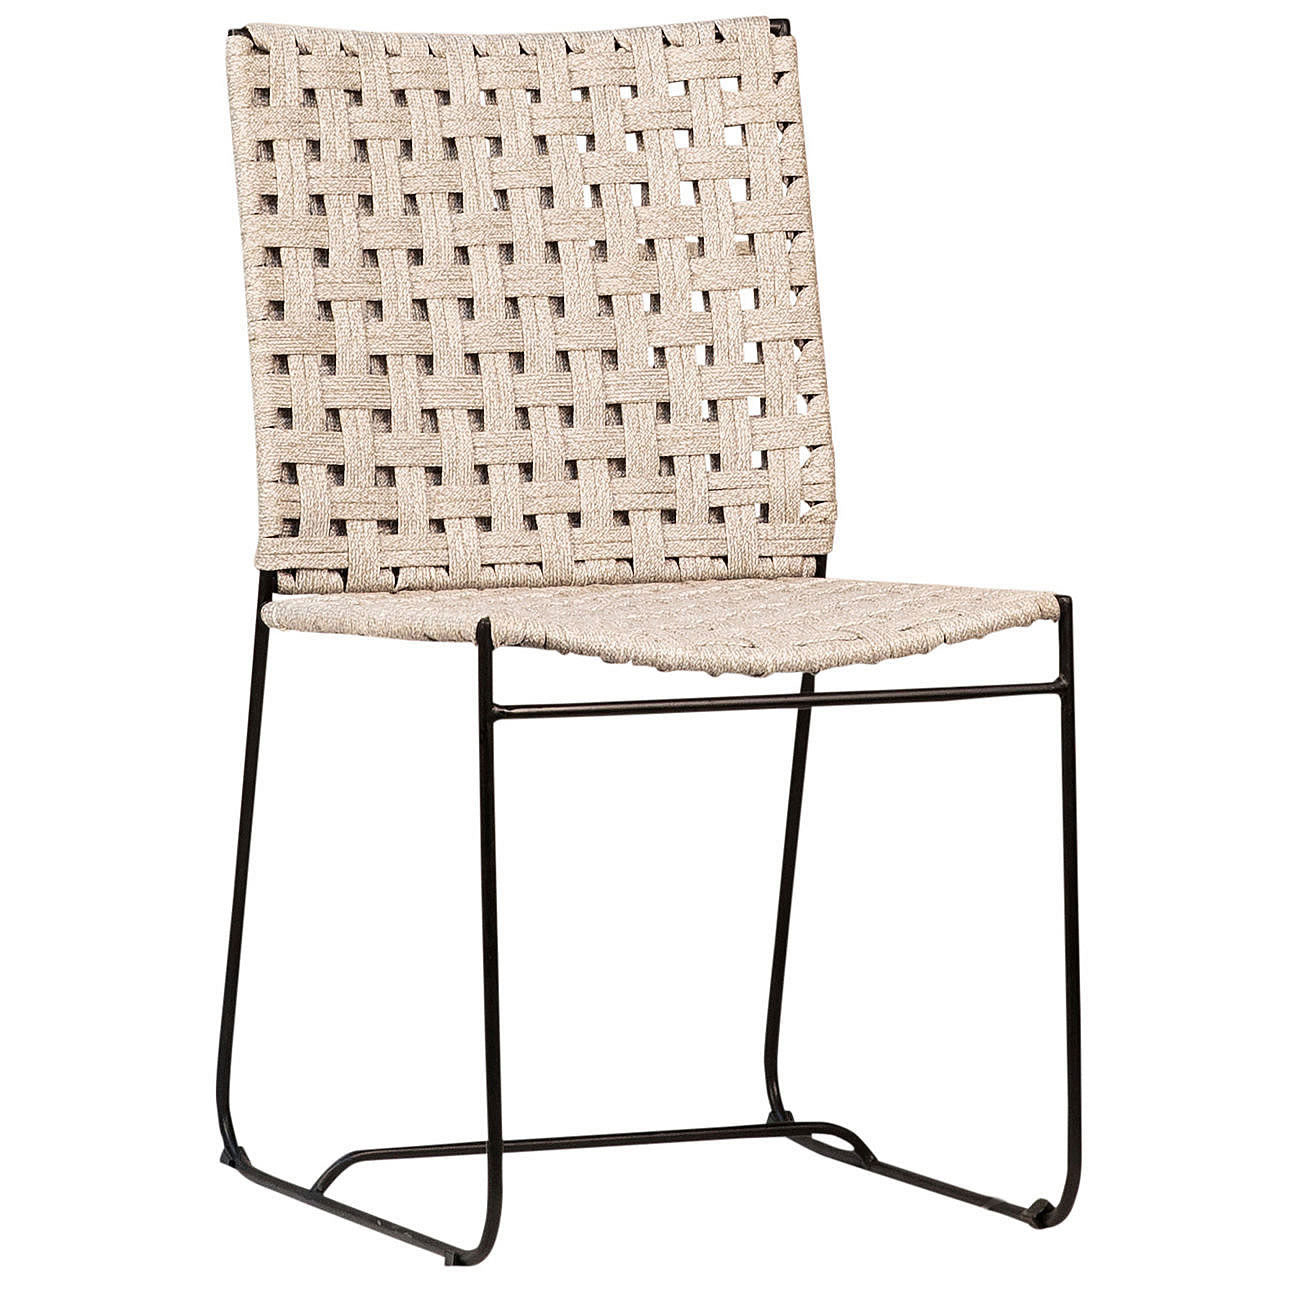 ezra-dining-chairs-in-natural-rope-black-powder-coated-legs-pair